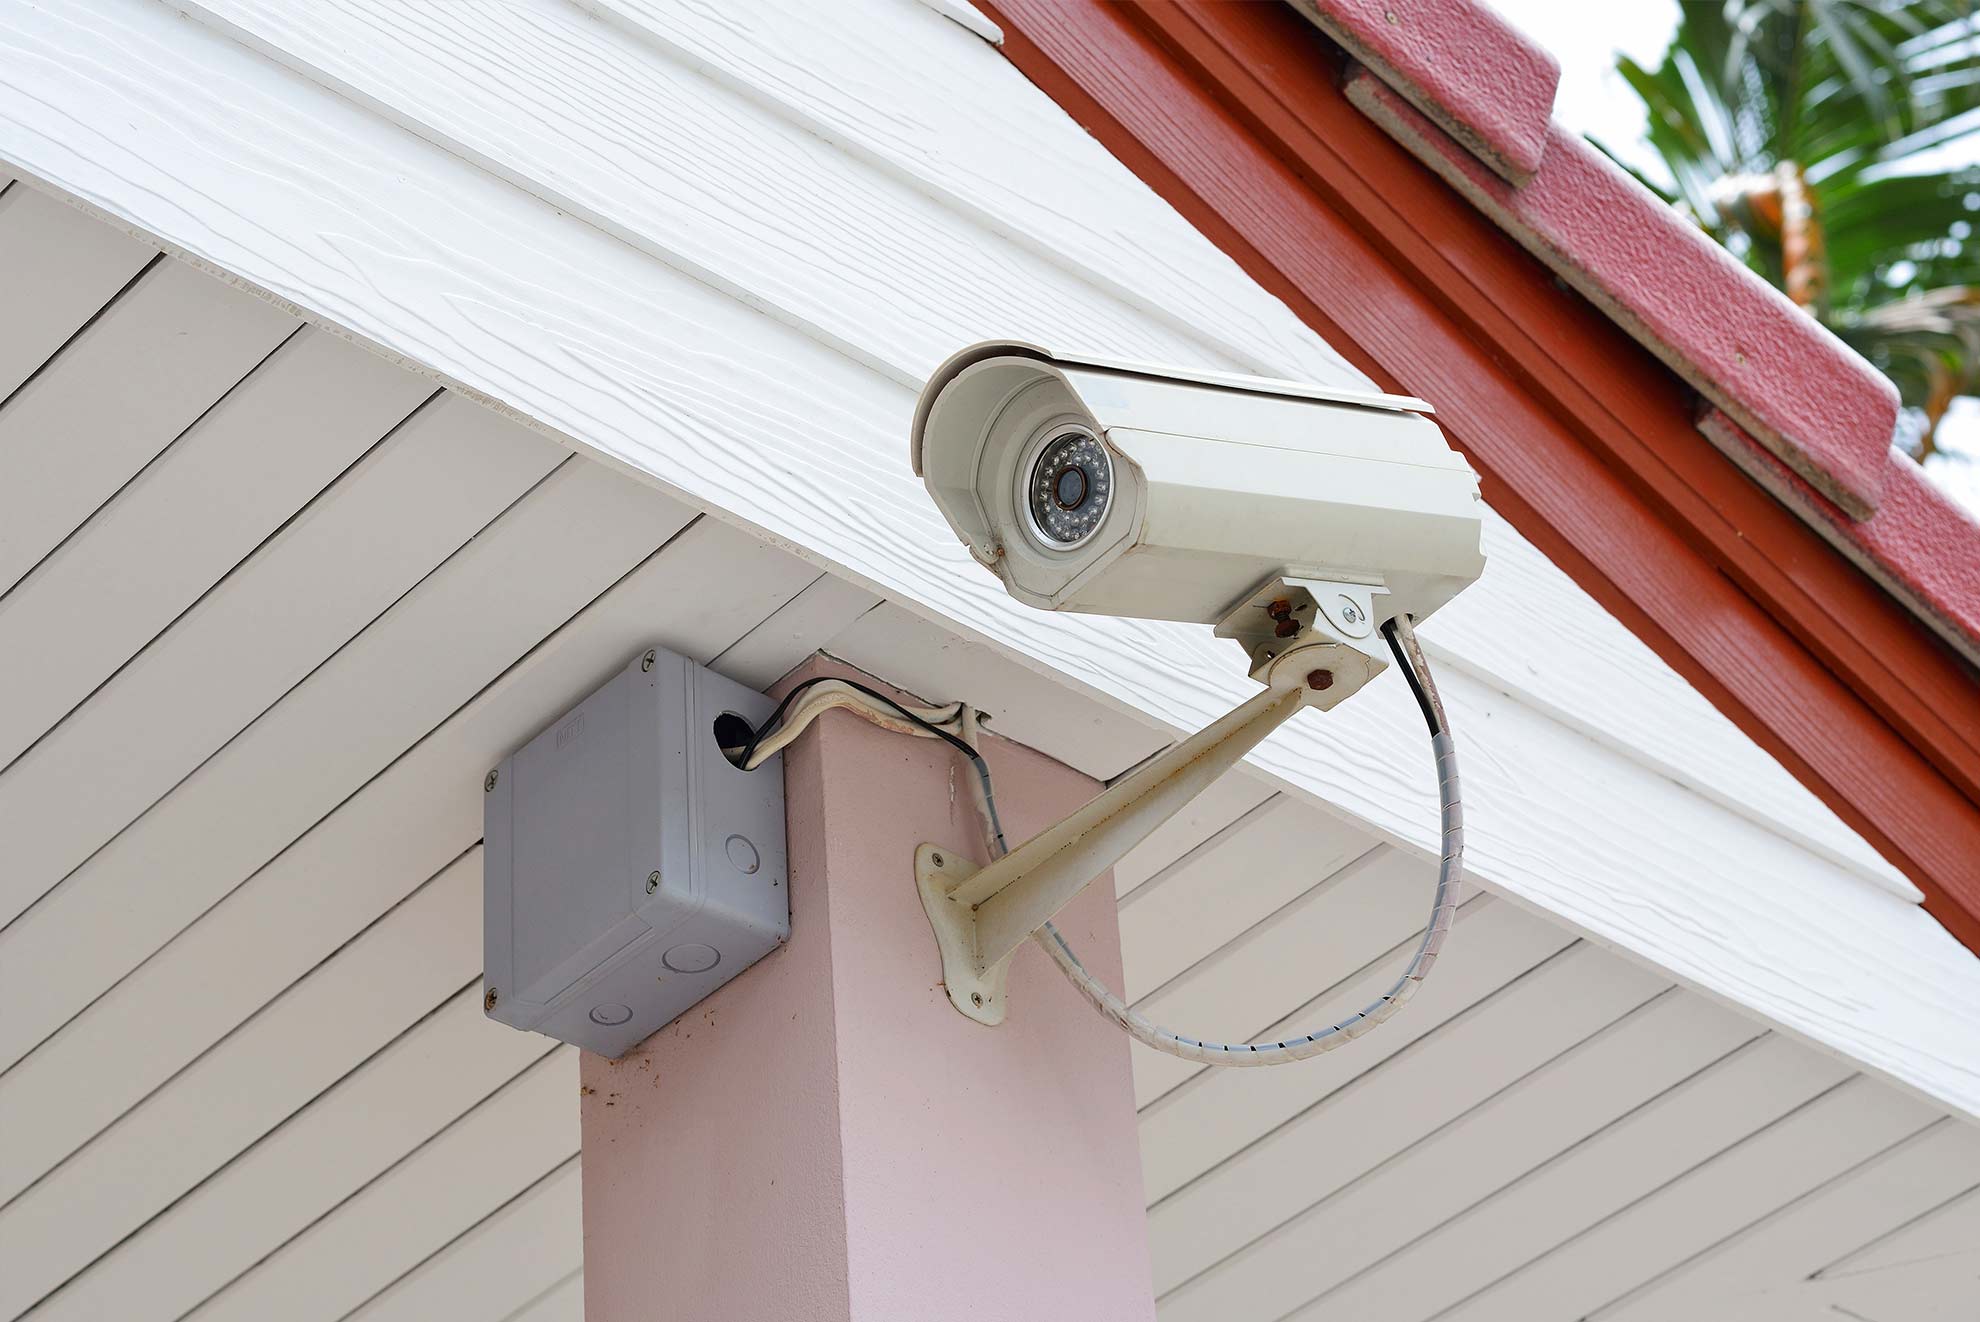 Affordable CCTV Installation Services in the Philippines - Carousell Philippines Blog